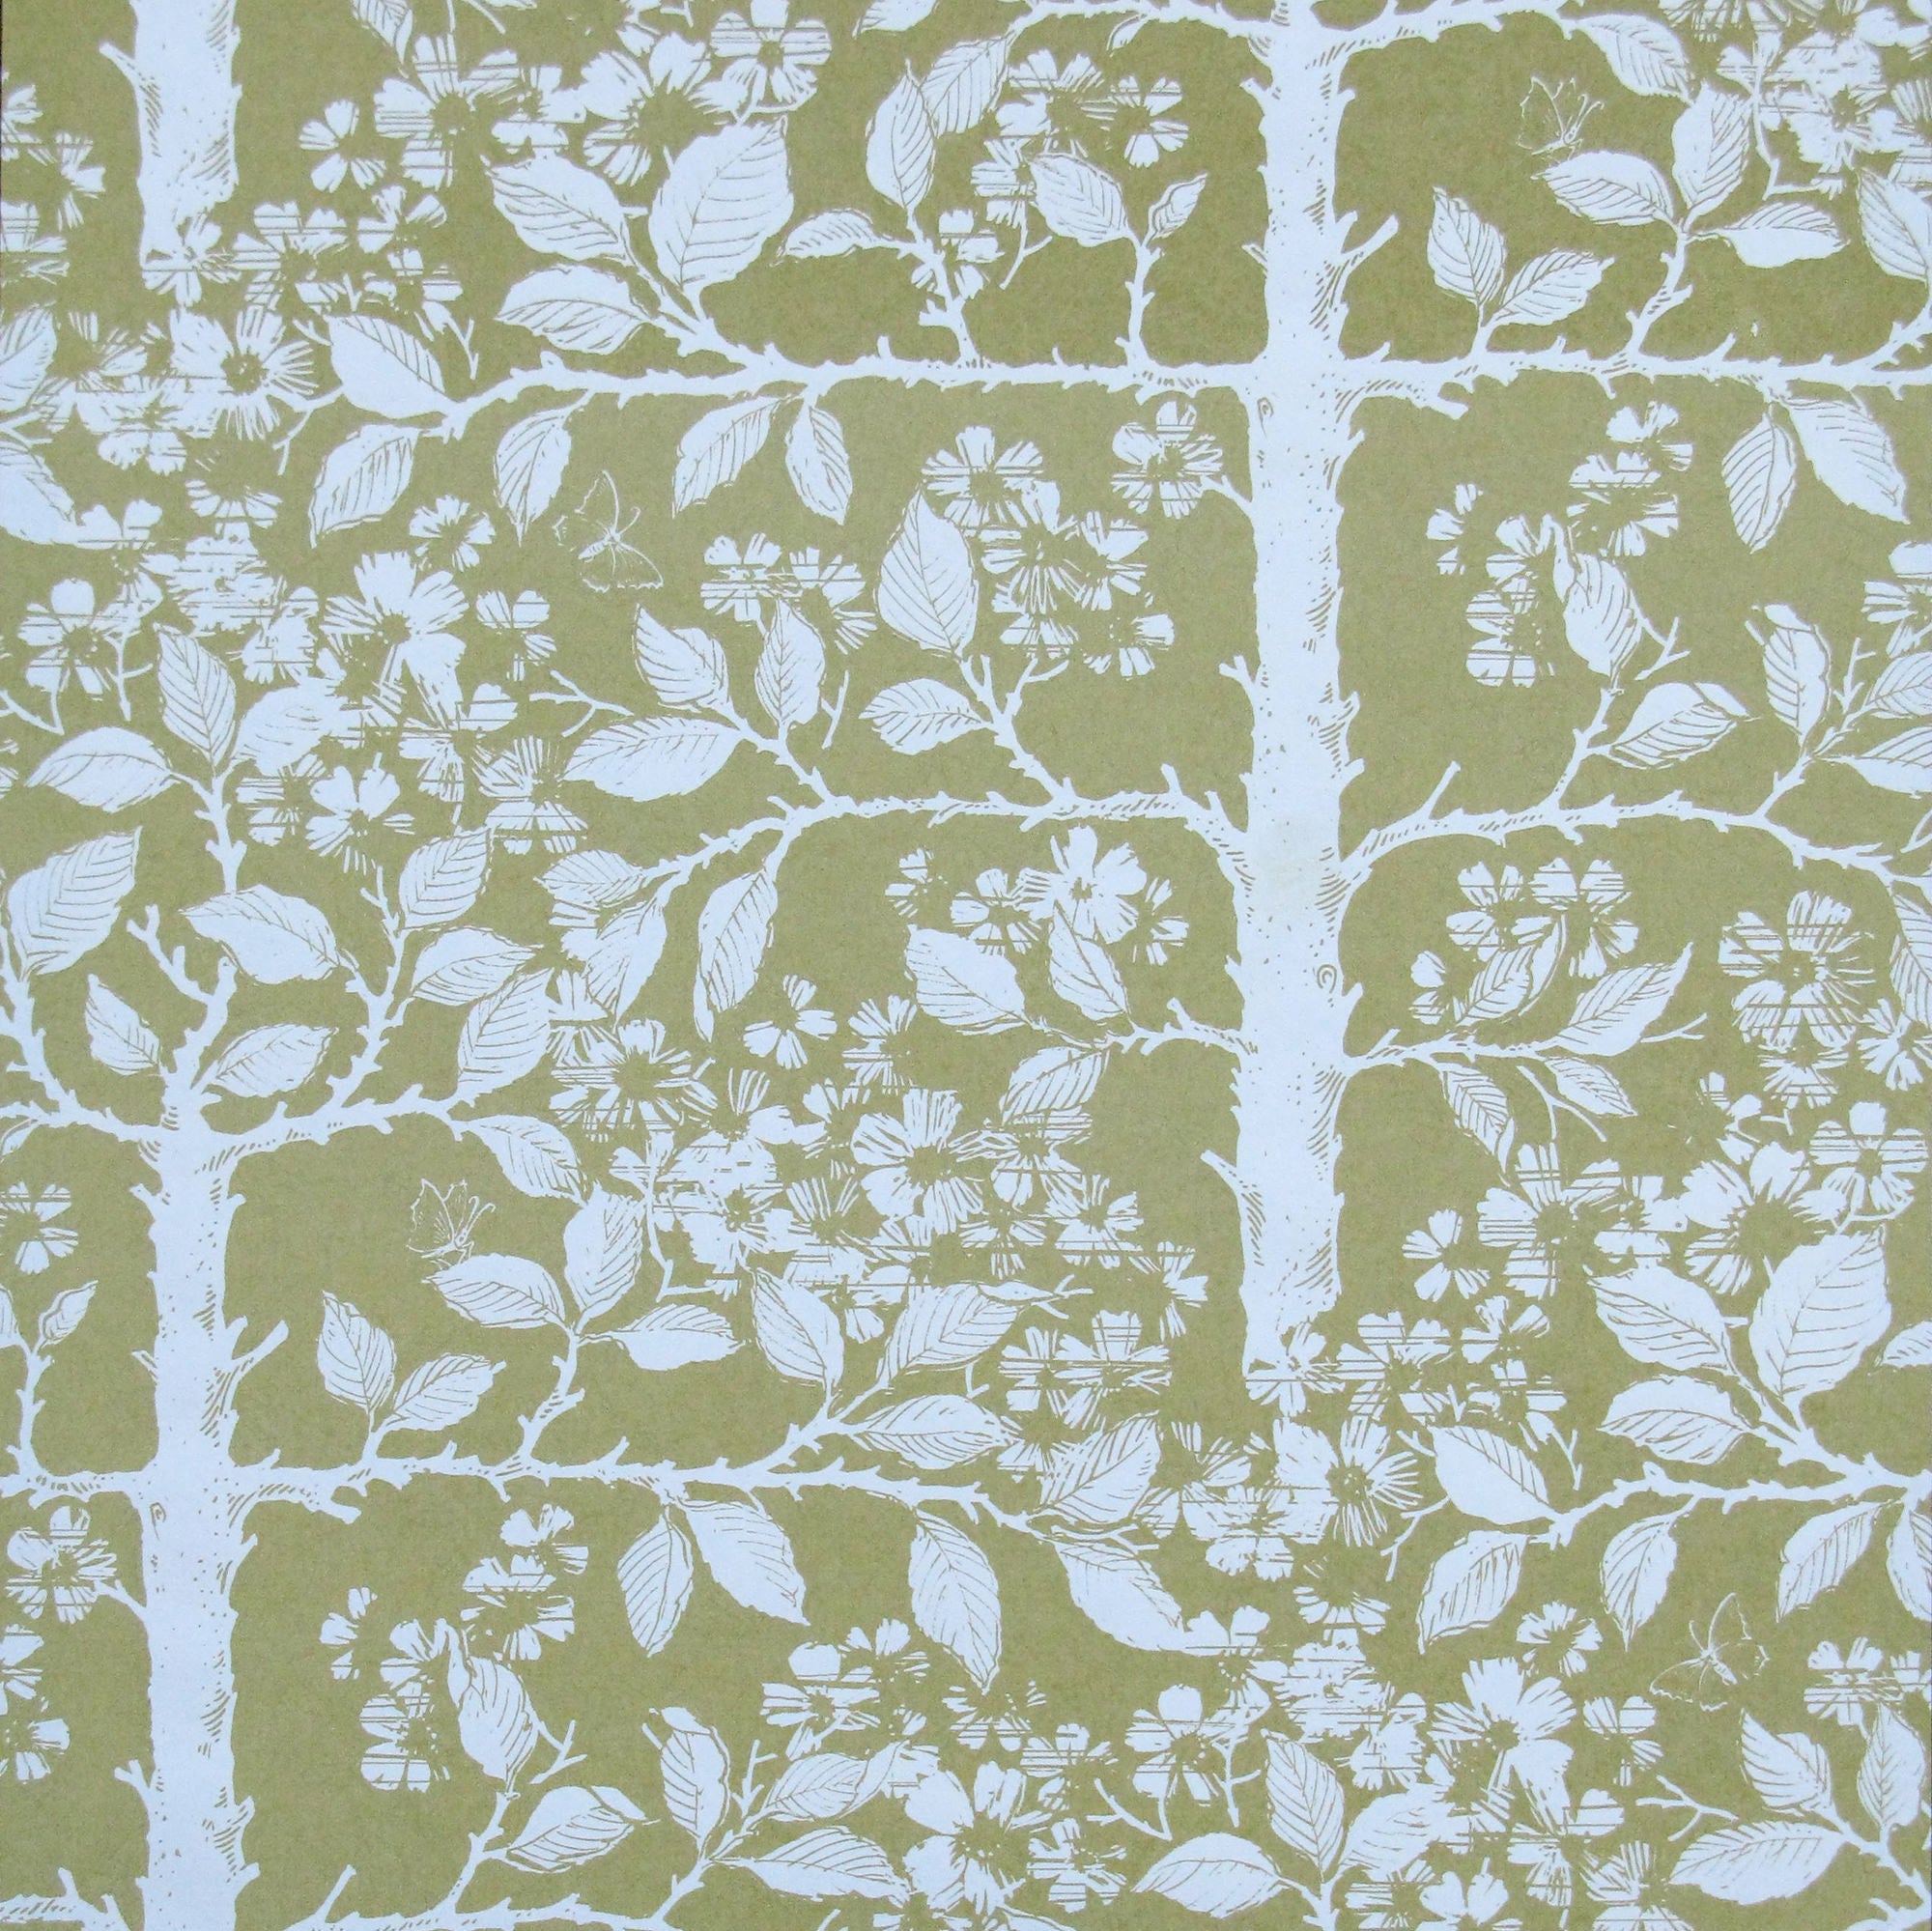 Detail of wallpaper in a large-scale tree and leaf print in white on a light green field.